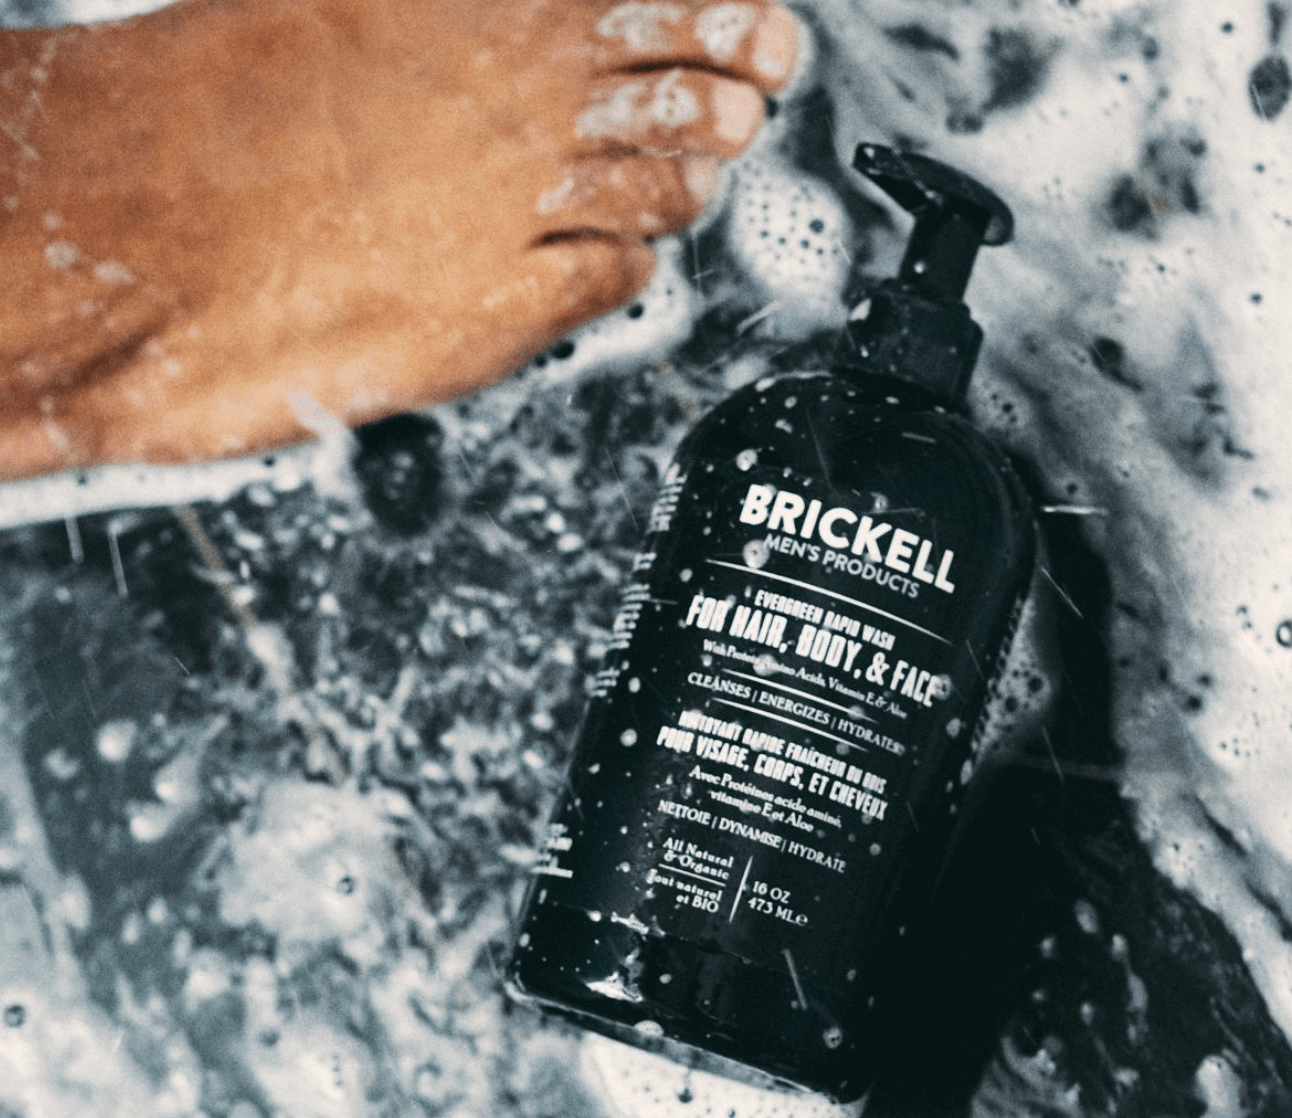 brickell men's products review